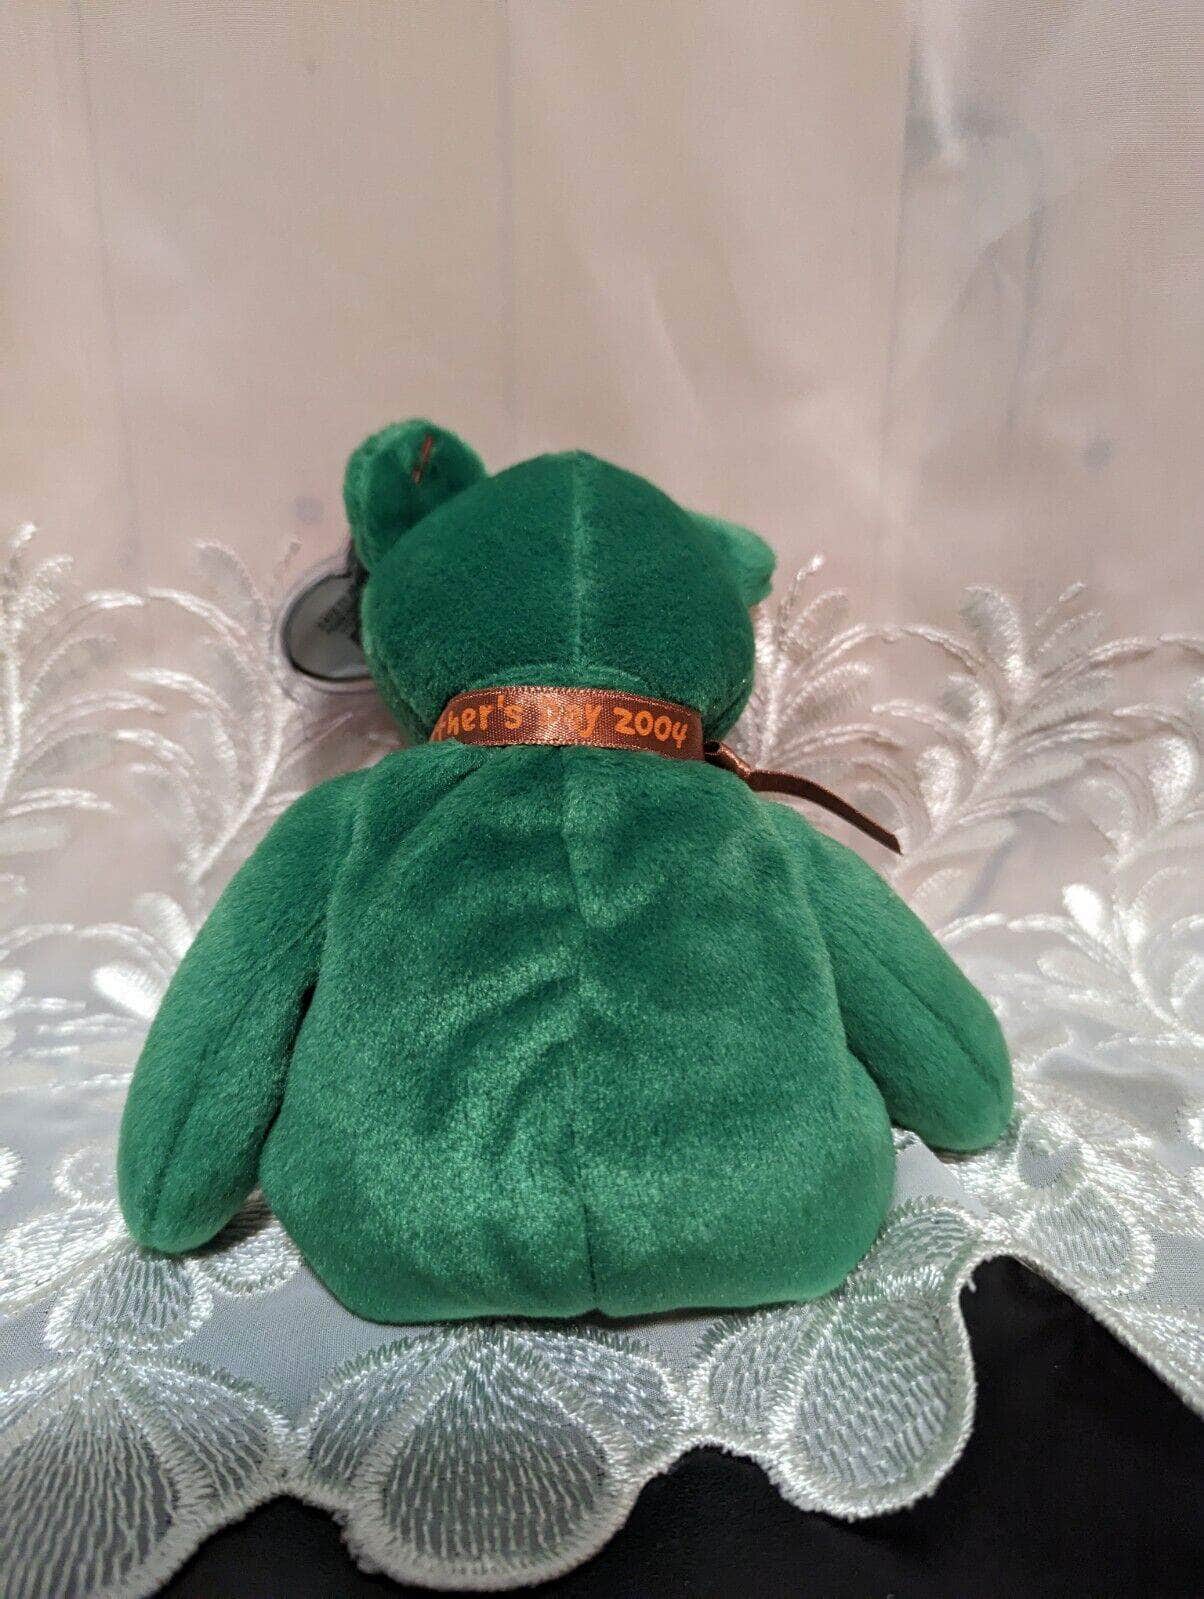 Ty Beanie Baby - Dad-e 2004 The Green Super Dad Father's Day Bear (8.5in) - Vintage Beanies Canada